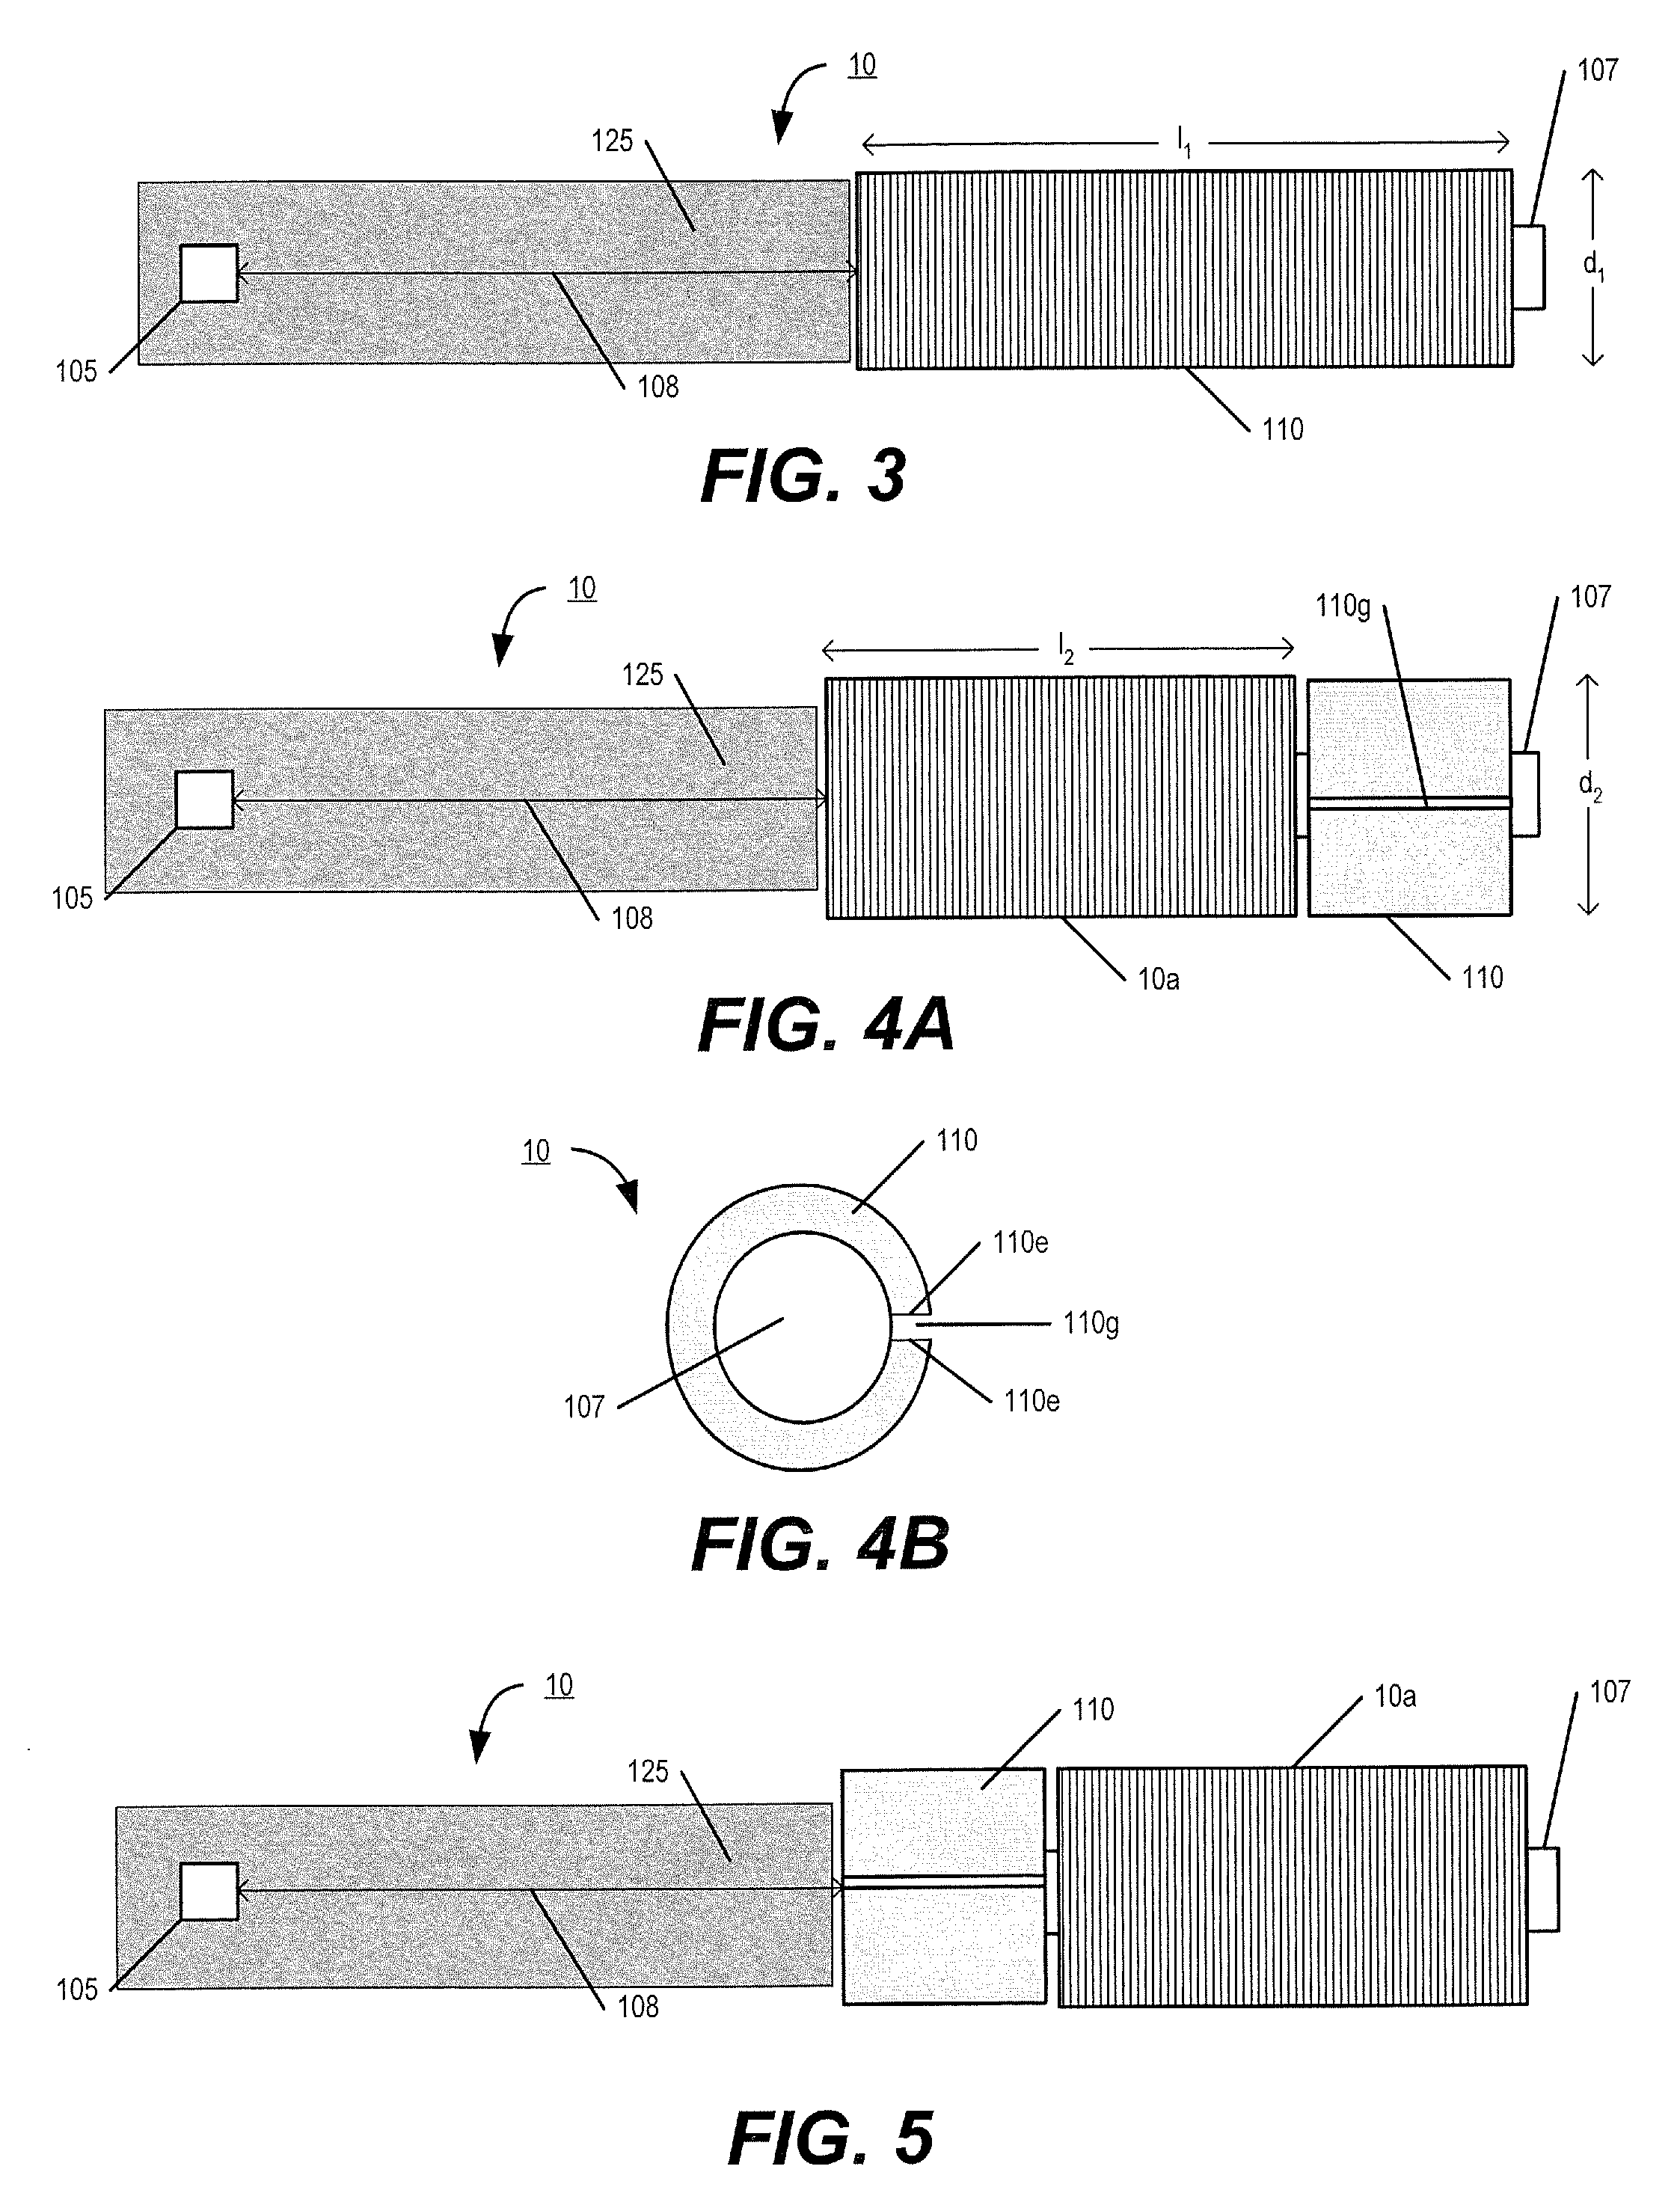 Trackable implantable sensor devices, systems, and related methods of operation